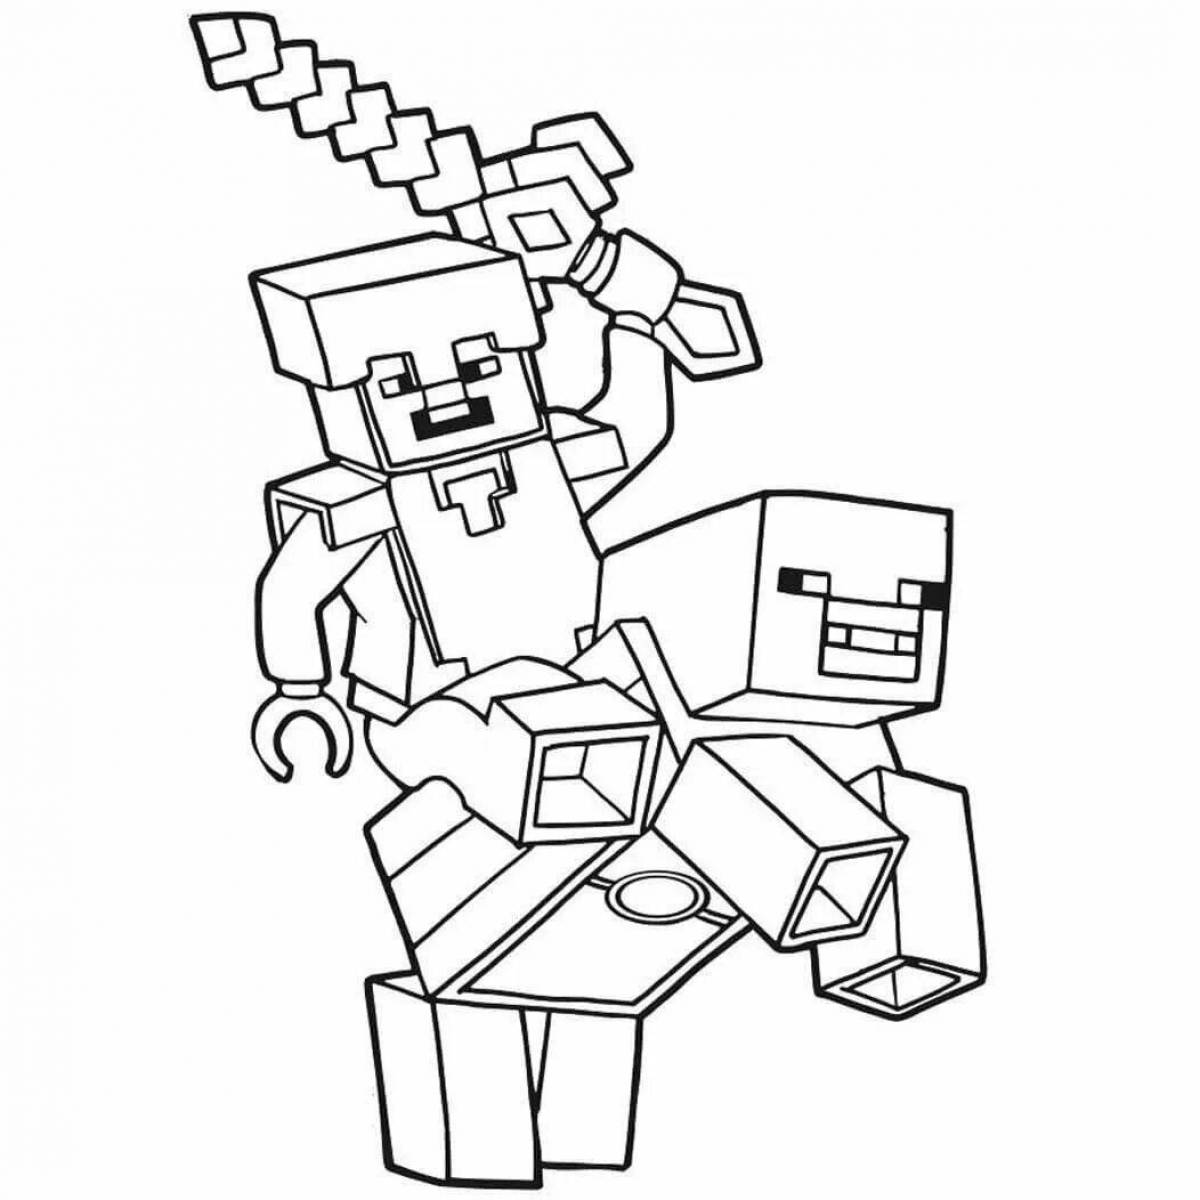 Zany minecraft shulker coloring page